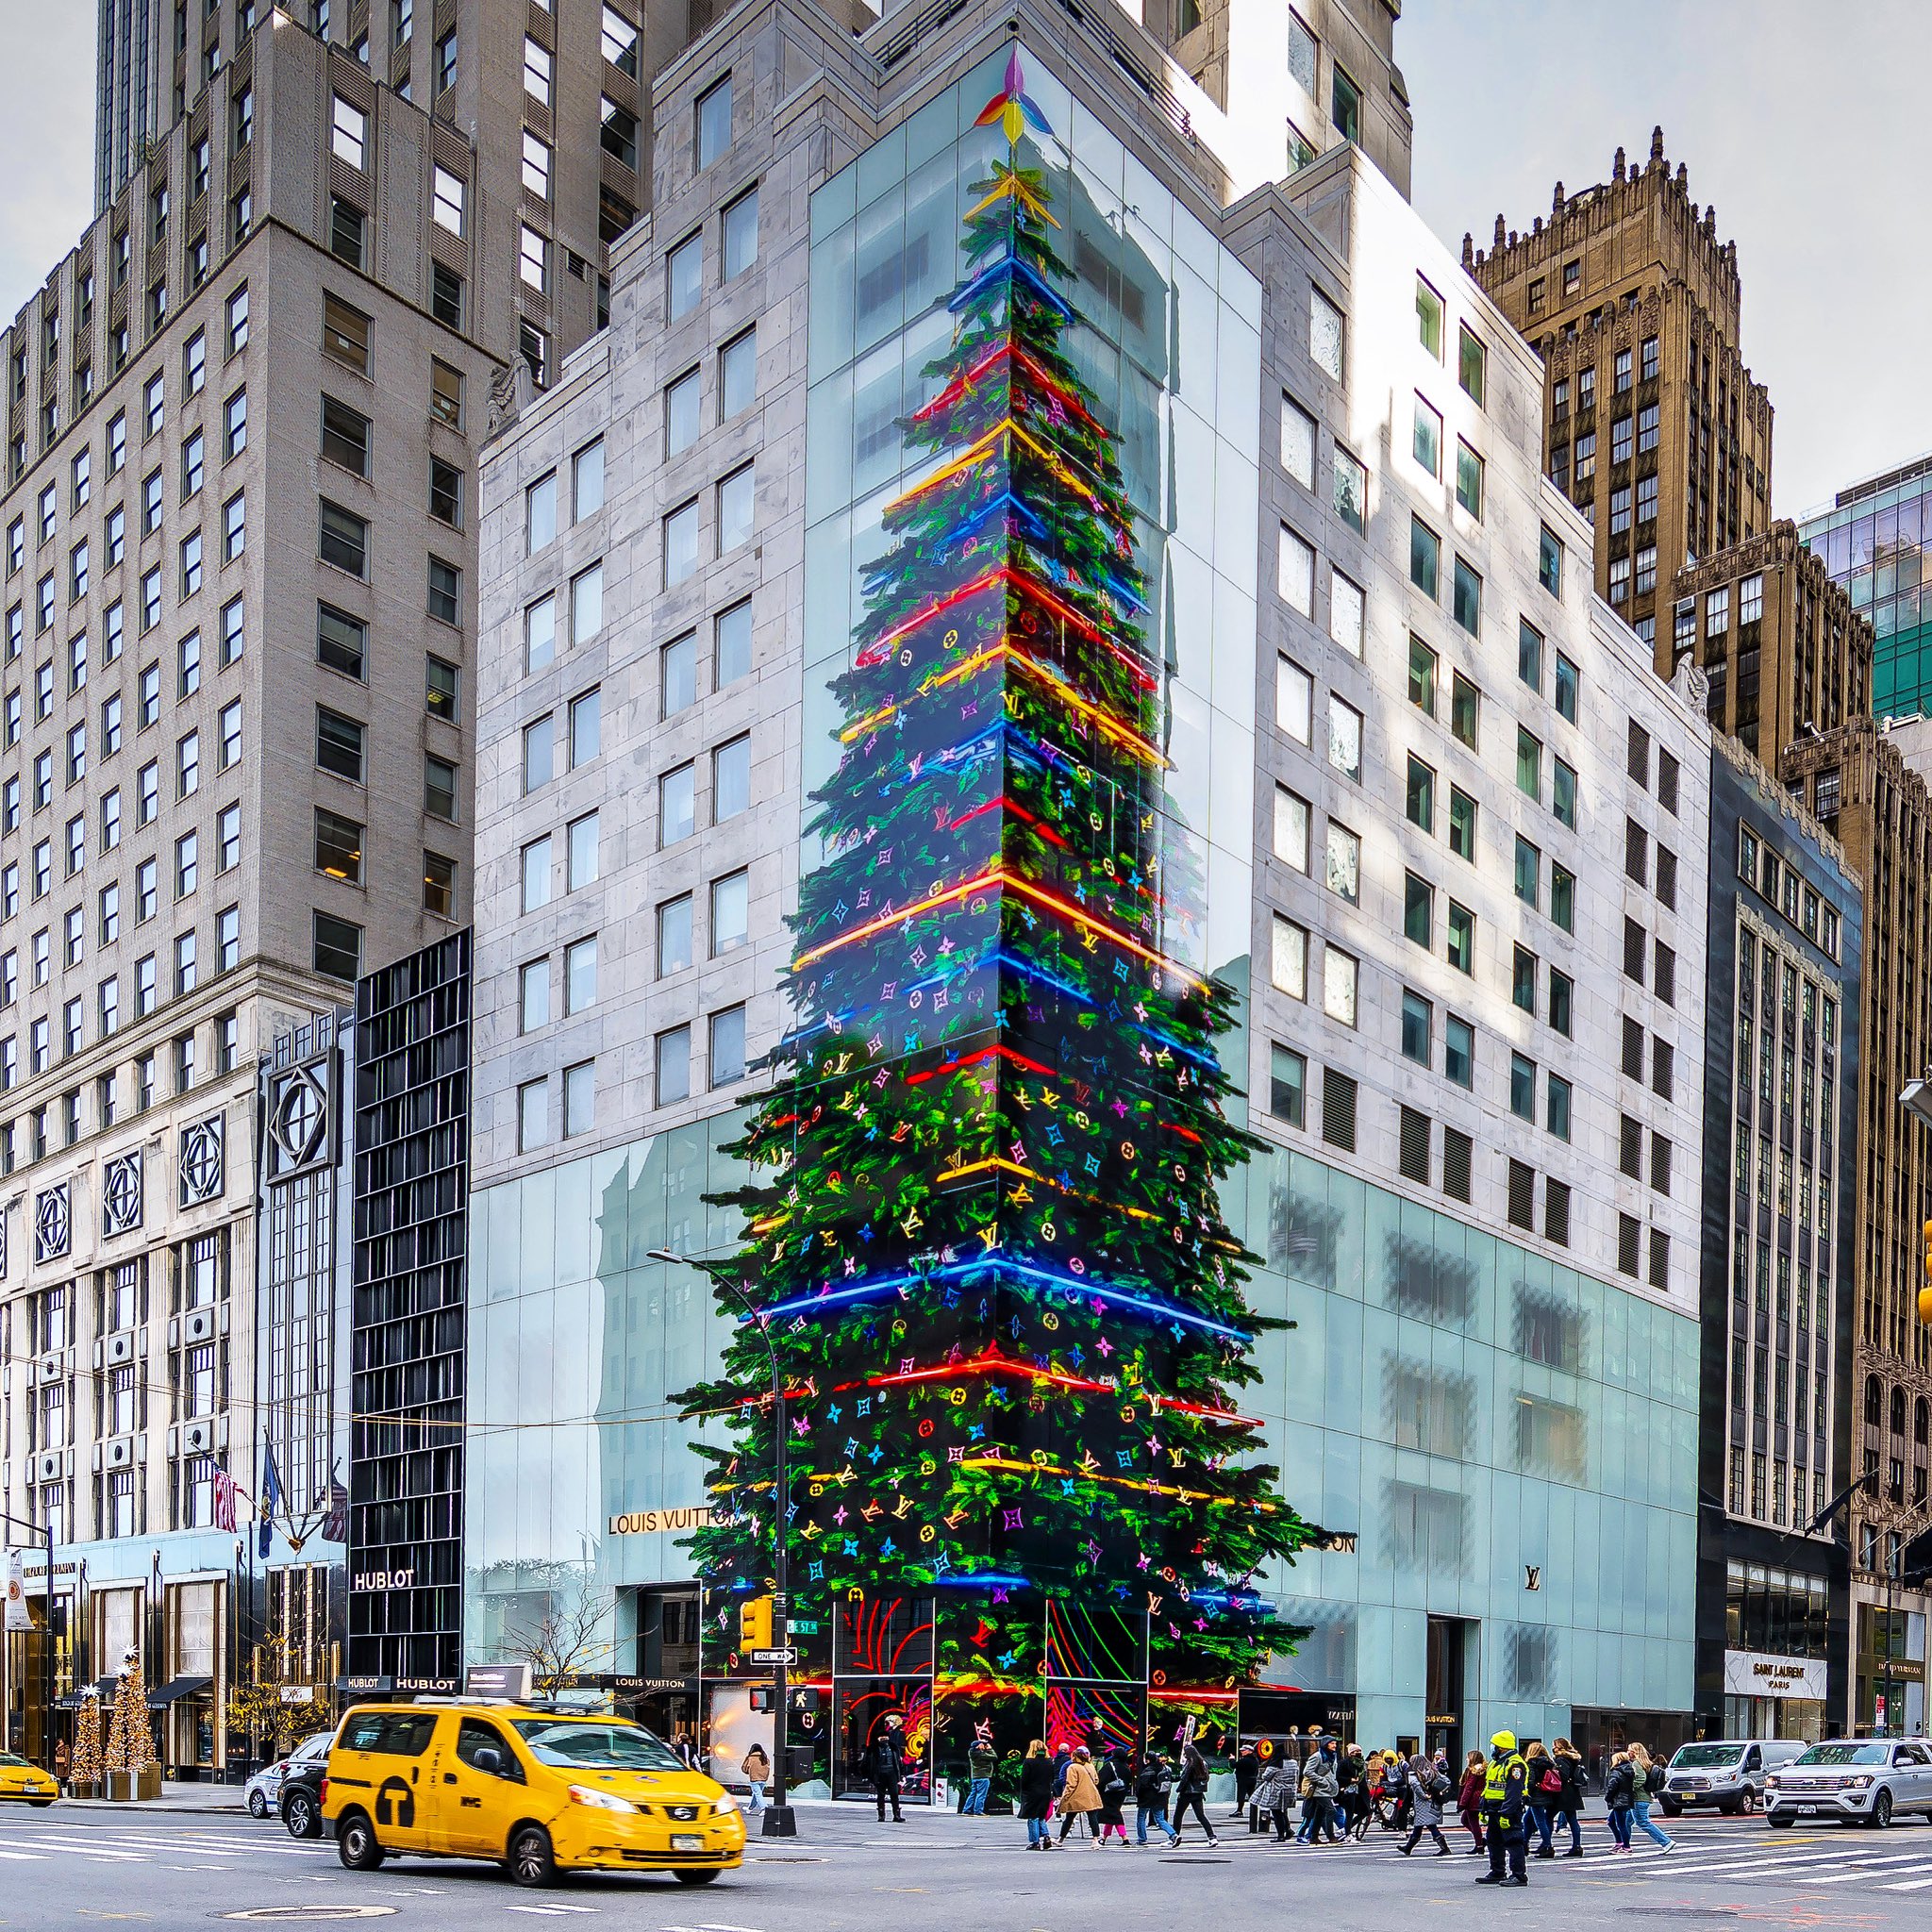 COMMB on X: A beautiful example of holiday-themed OOH creative! This  12-story mural can be found on the corner of Louis Vuitton's 5th Avenue  store in #NewYorkCity. #WorldwideWednesdays #ooh #marketing #advertising  #holiday